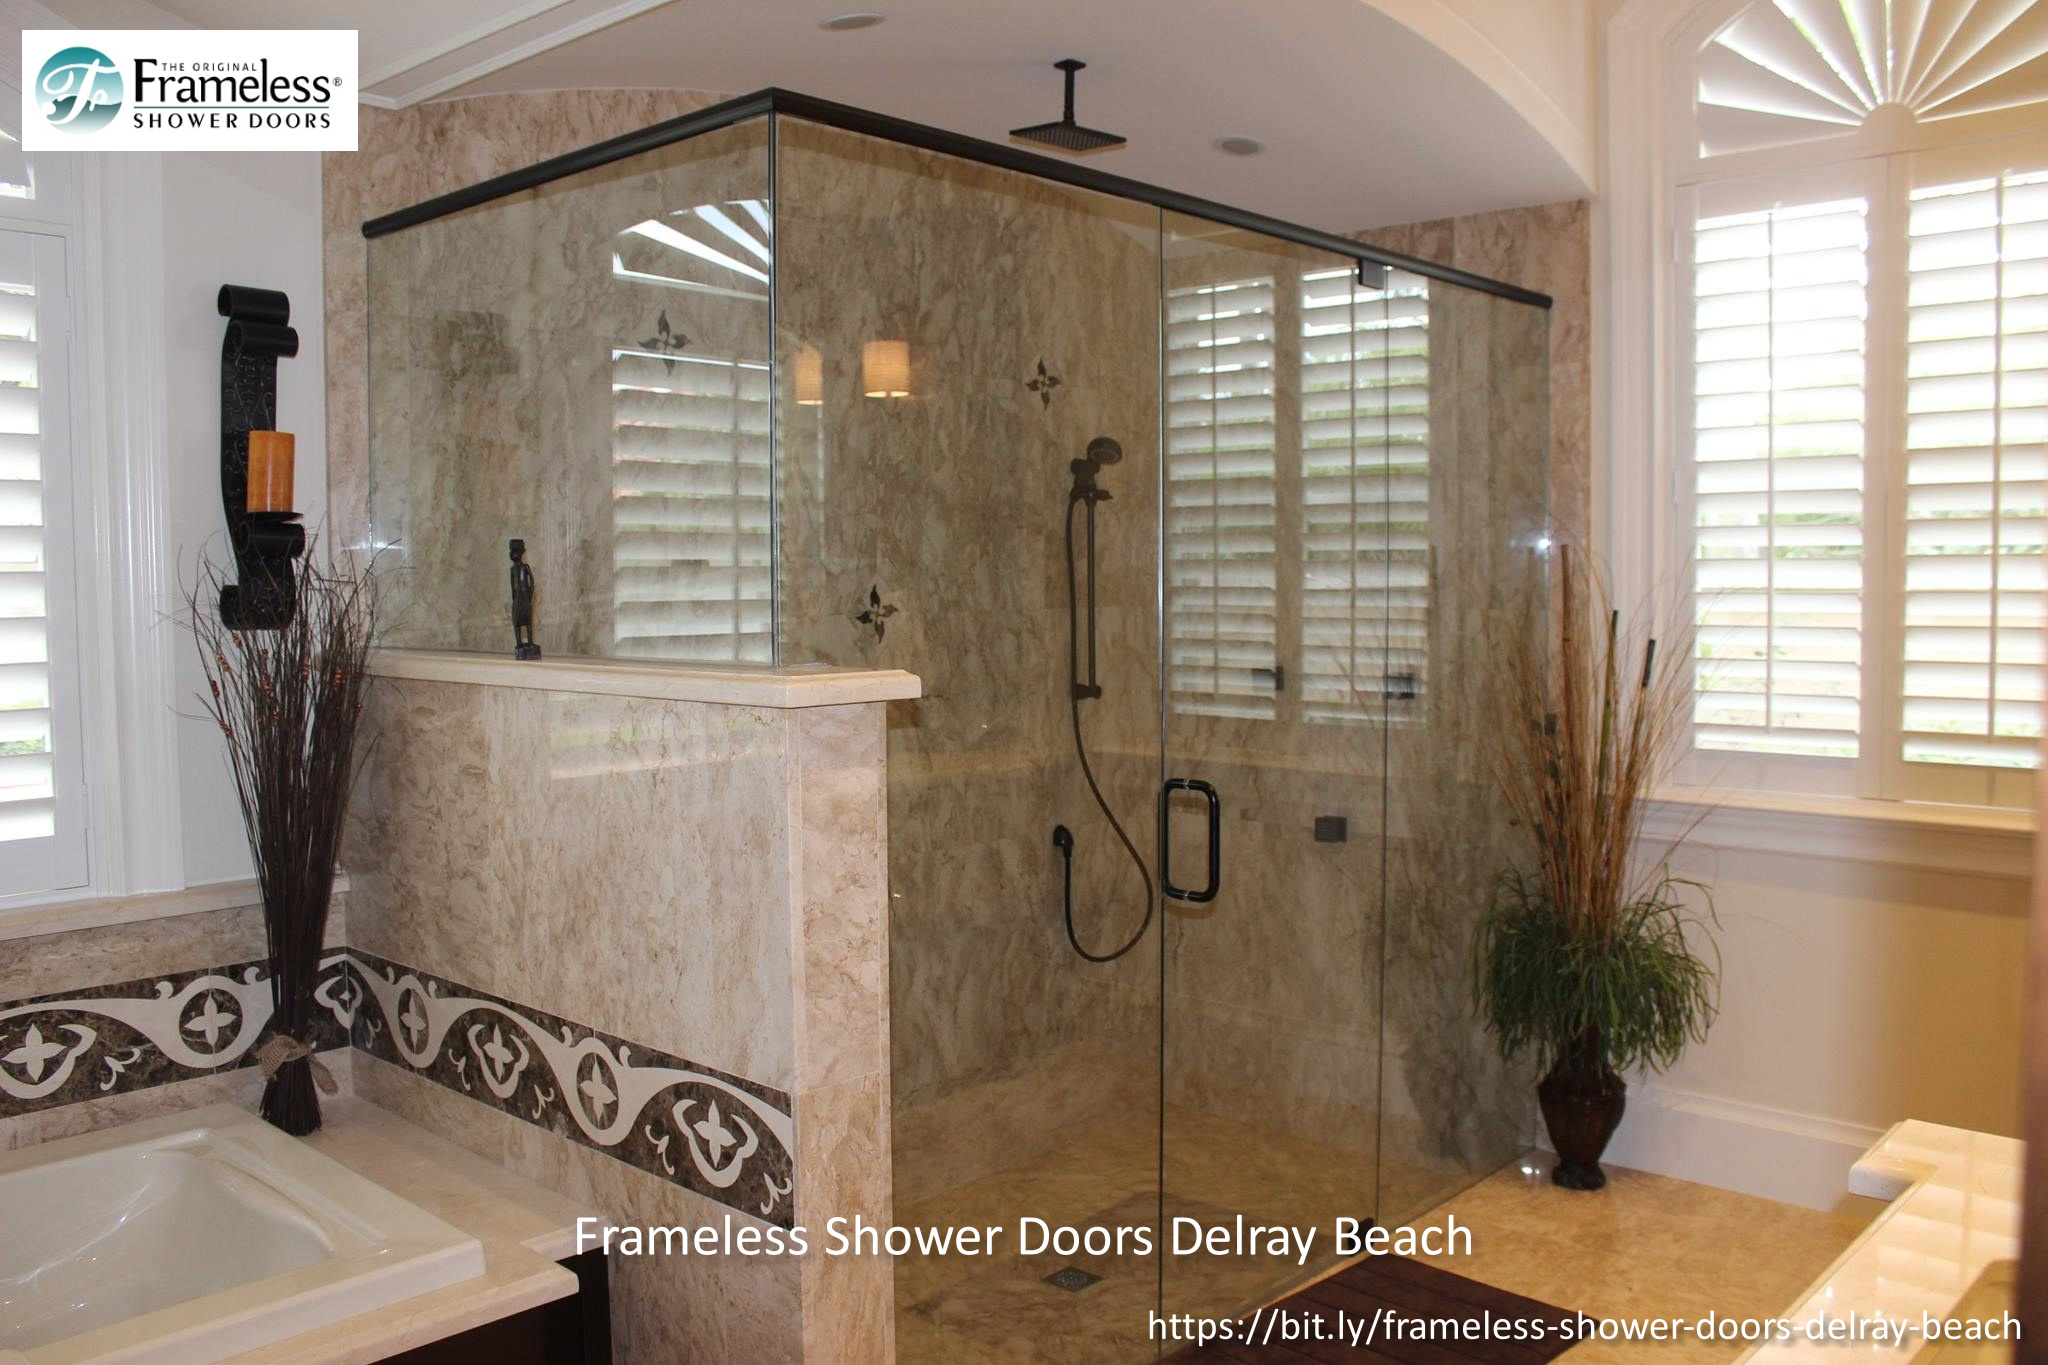 , Everything You Need to Know about Boynton Beach, Florida, Frameless Shower Doors